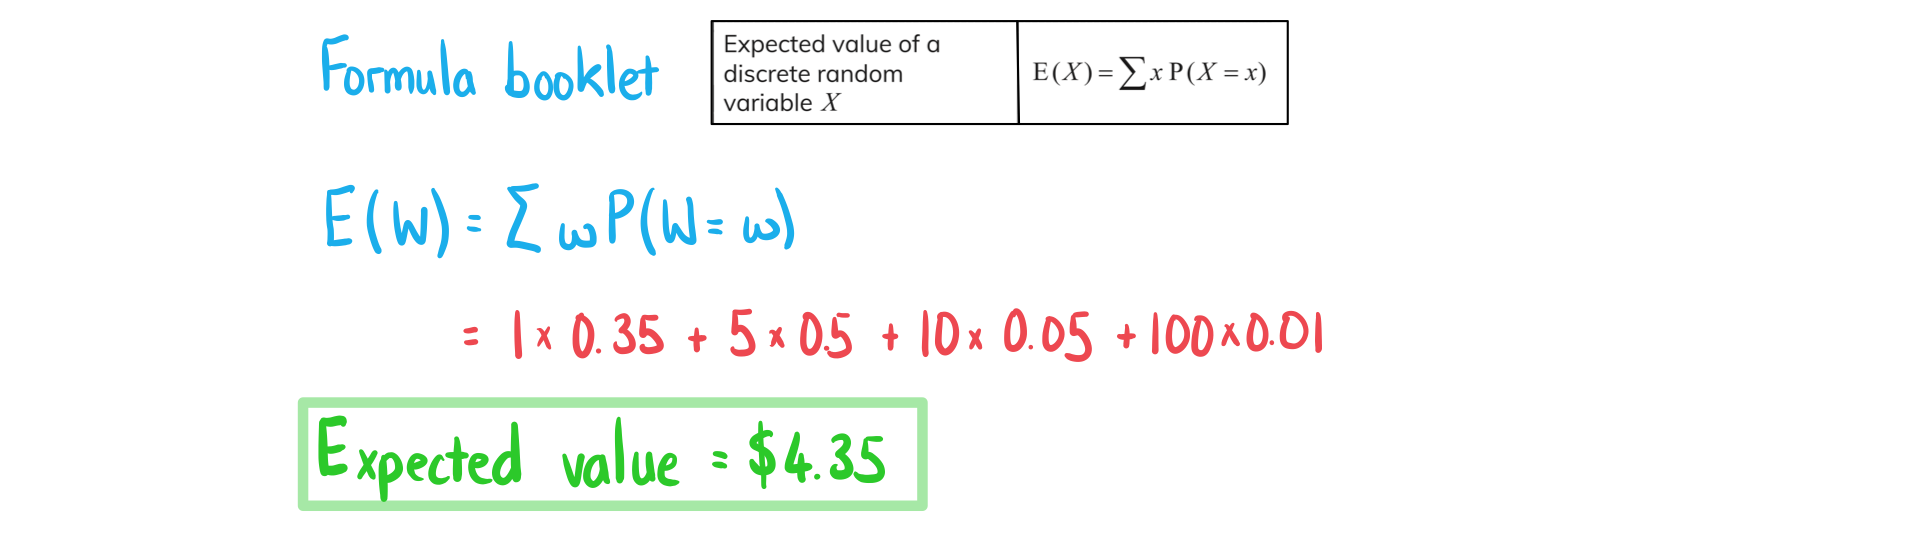 4-4-2-ib-ai-aa-sl-expected-values-a-we-solution